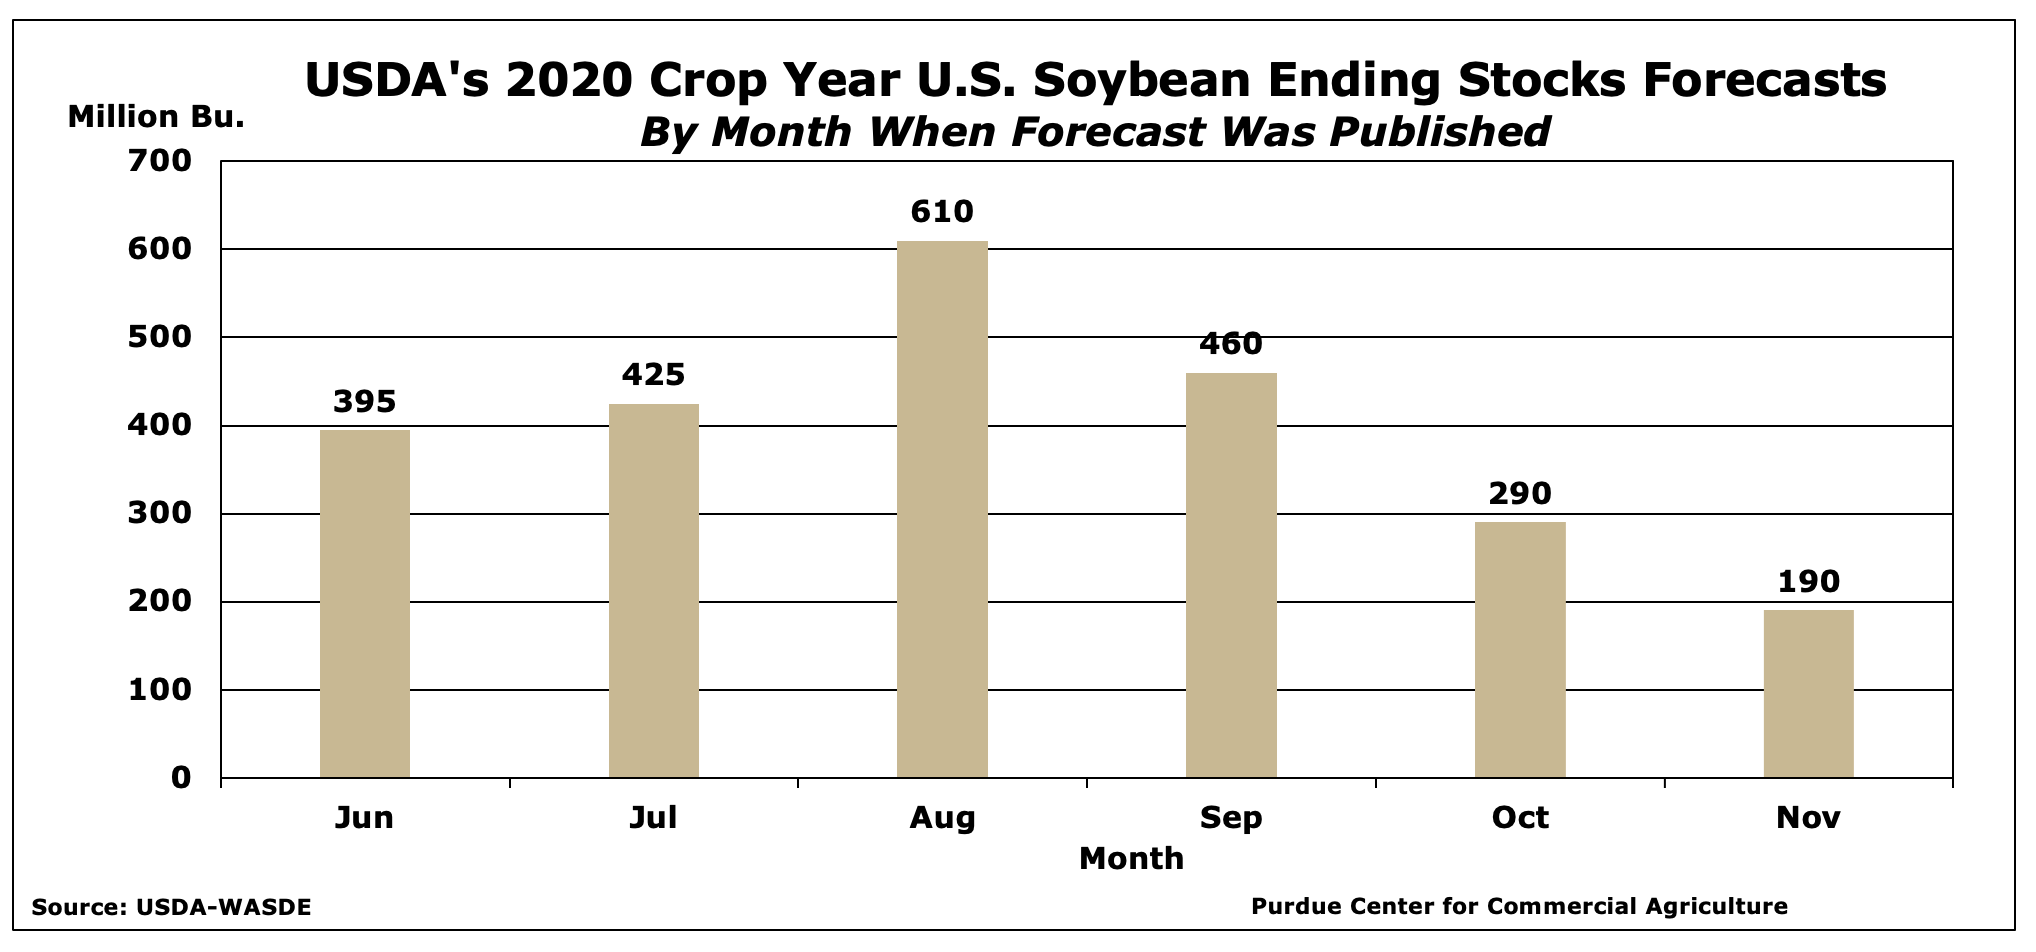 Figure 2: USDA’s 2020 Crop Year U.S. Soybean Ending Stocks Forecasts, by month when forecast was published.